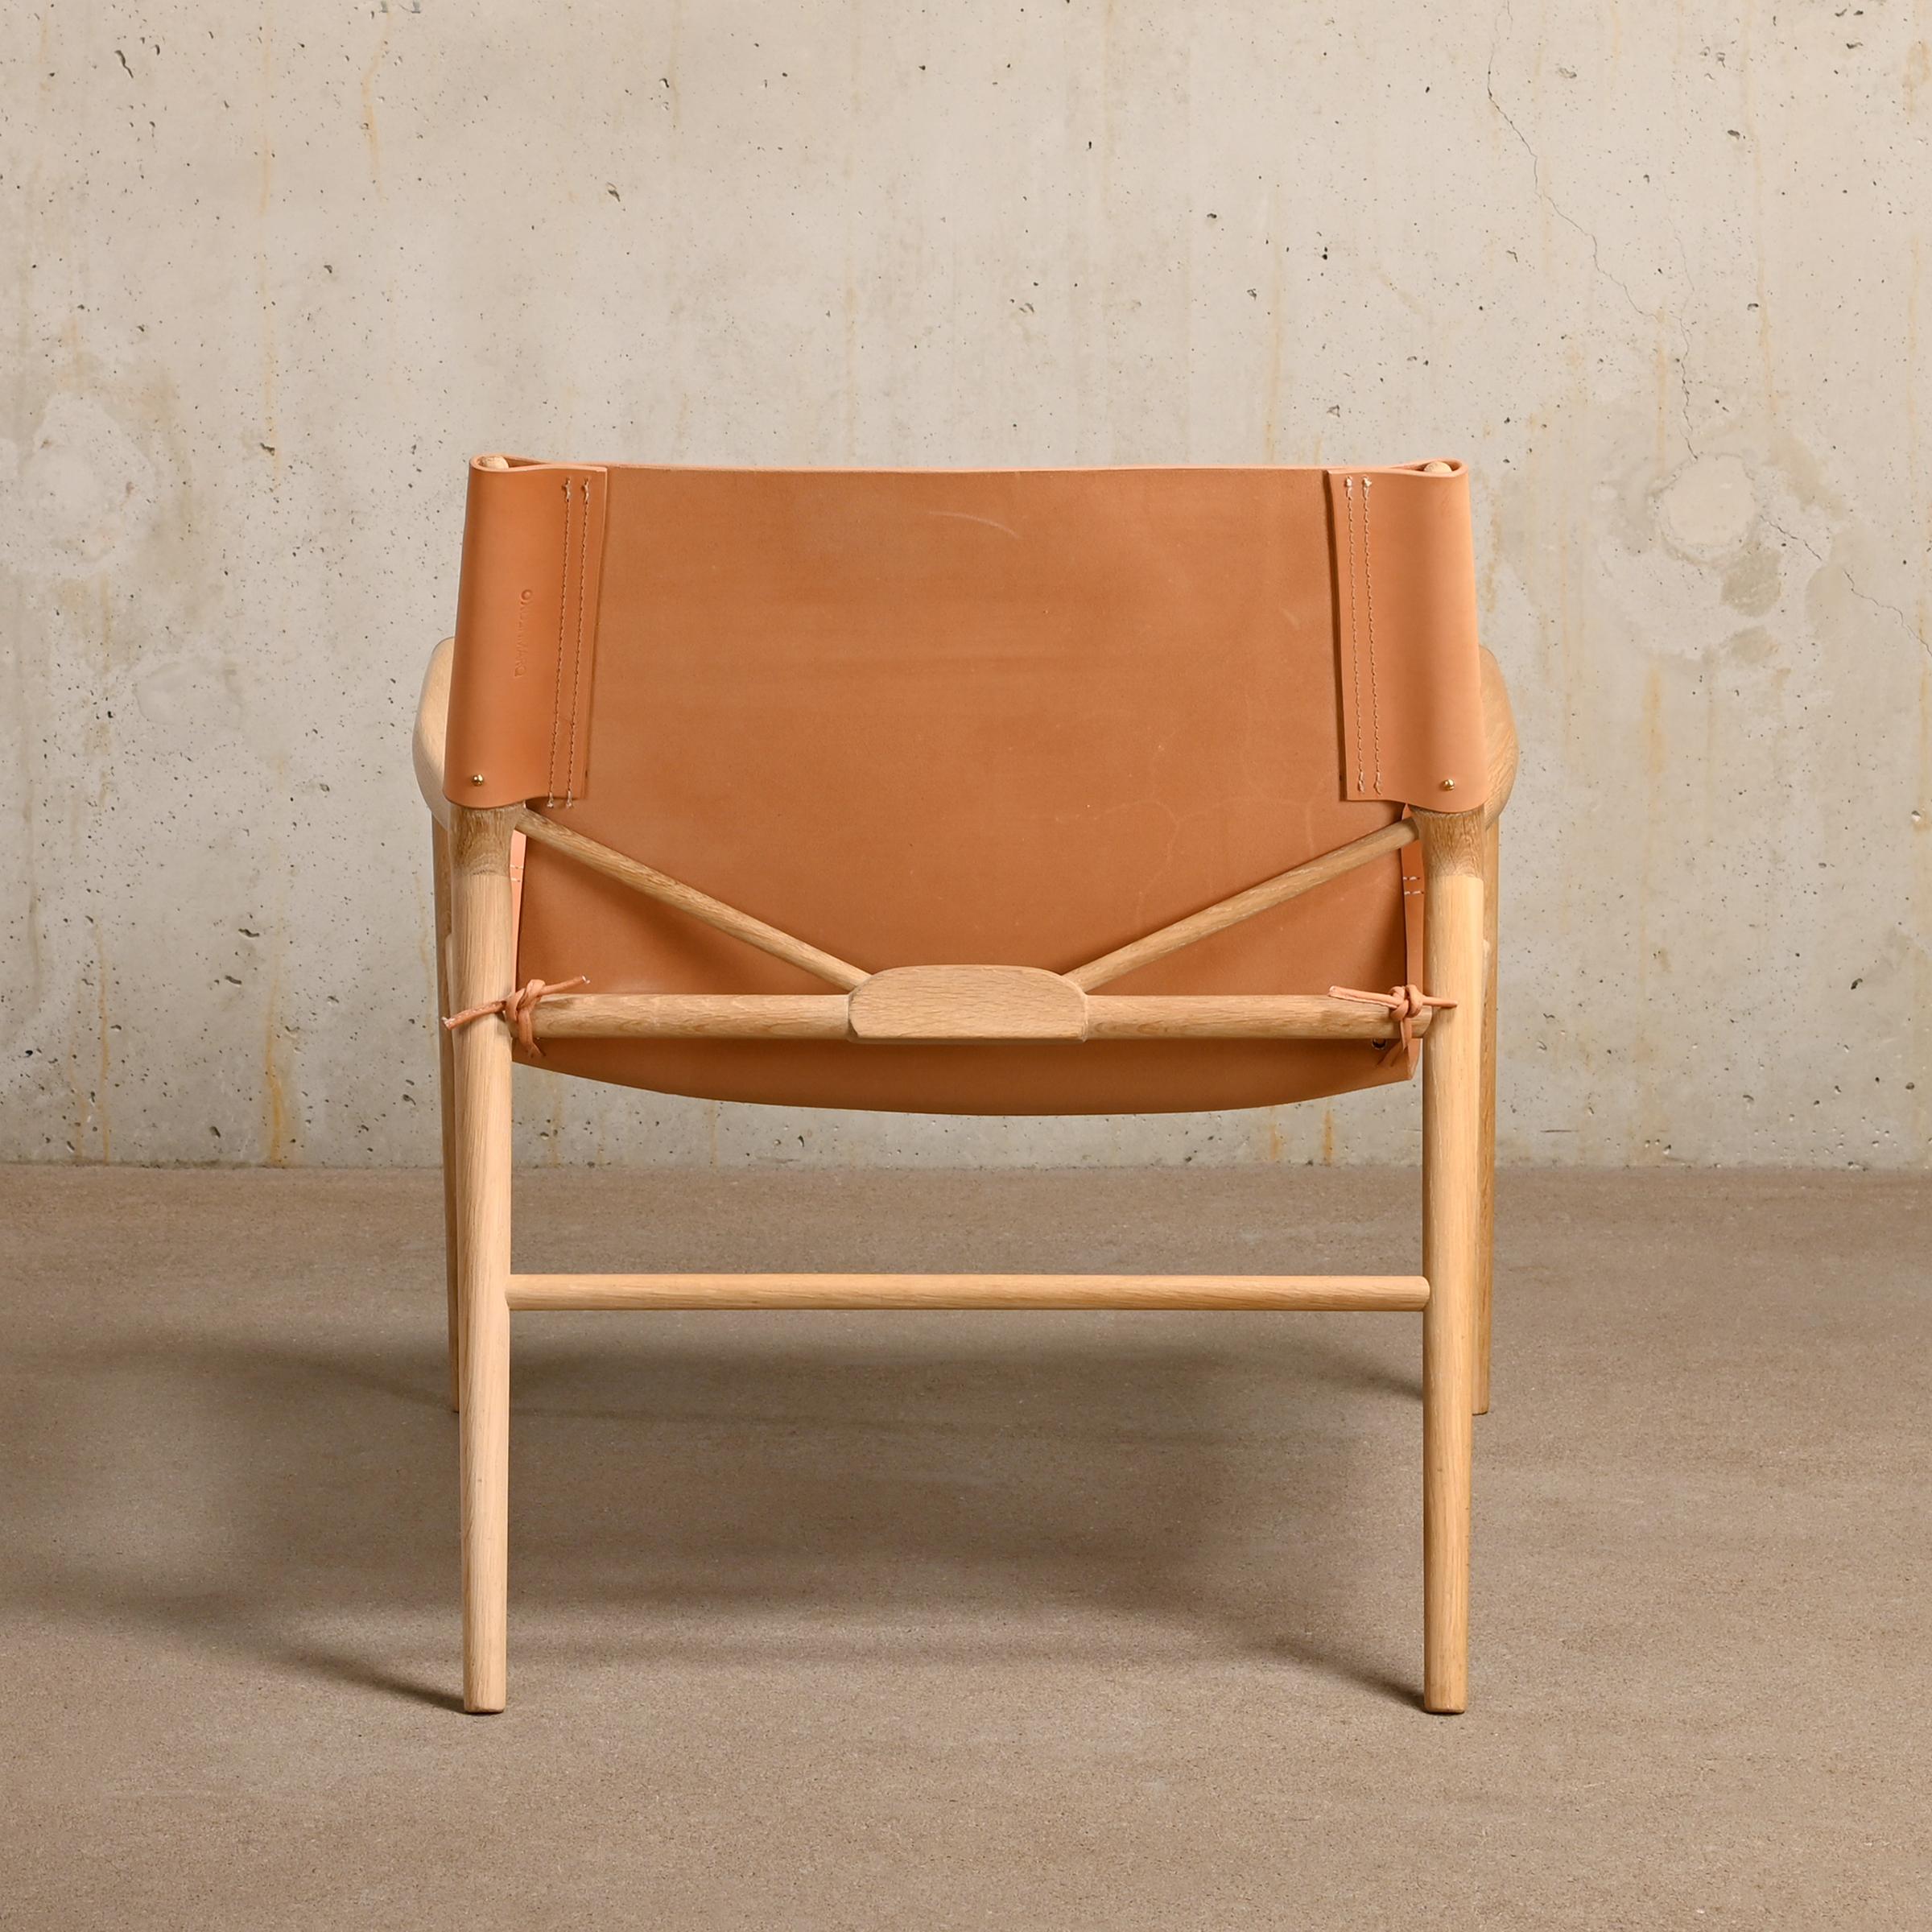 Dennis Marquart Rama Chair in Natural Leather and Oak for Oxdenmarq In Excellent Condition For Sale In Amsterdam, NL